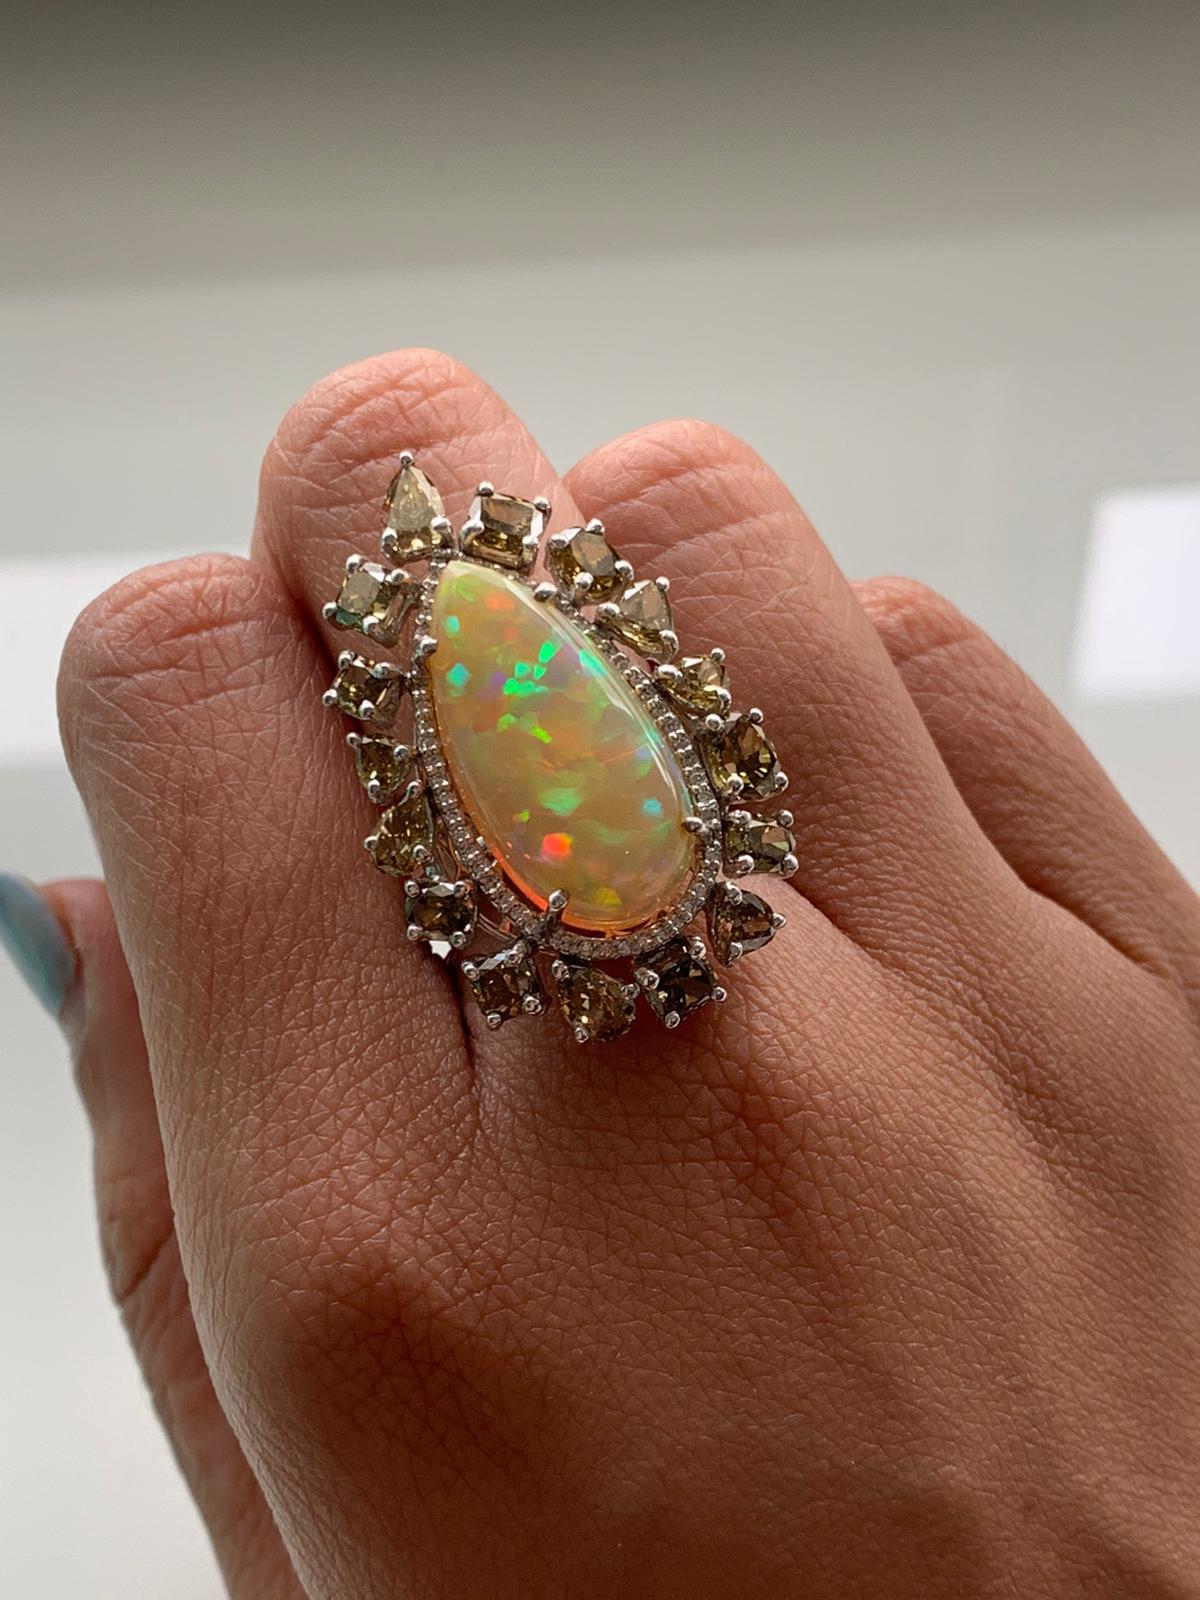 A modern cocktail ring set in 18k white gold with Ethiopian natural opal and natural fancy colour diamonds. The opal weight is 7.72 carats and diamond weight is 4.7 carats. The net gold weight is 8.29 grams and ring dimensions in cm 3.4 x 2 x 2.5